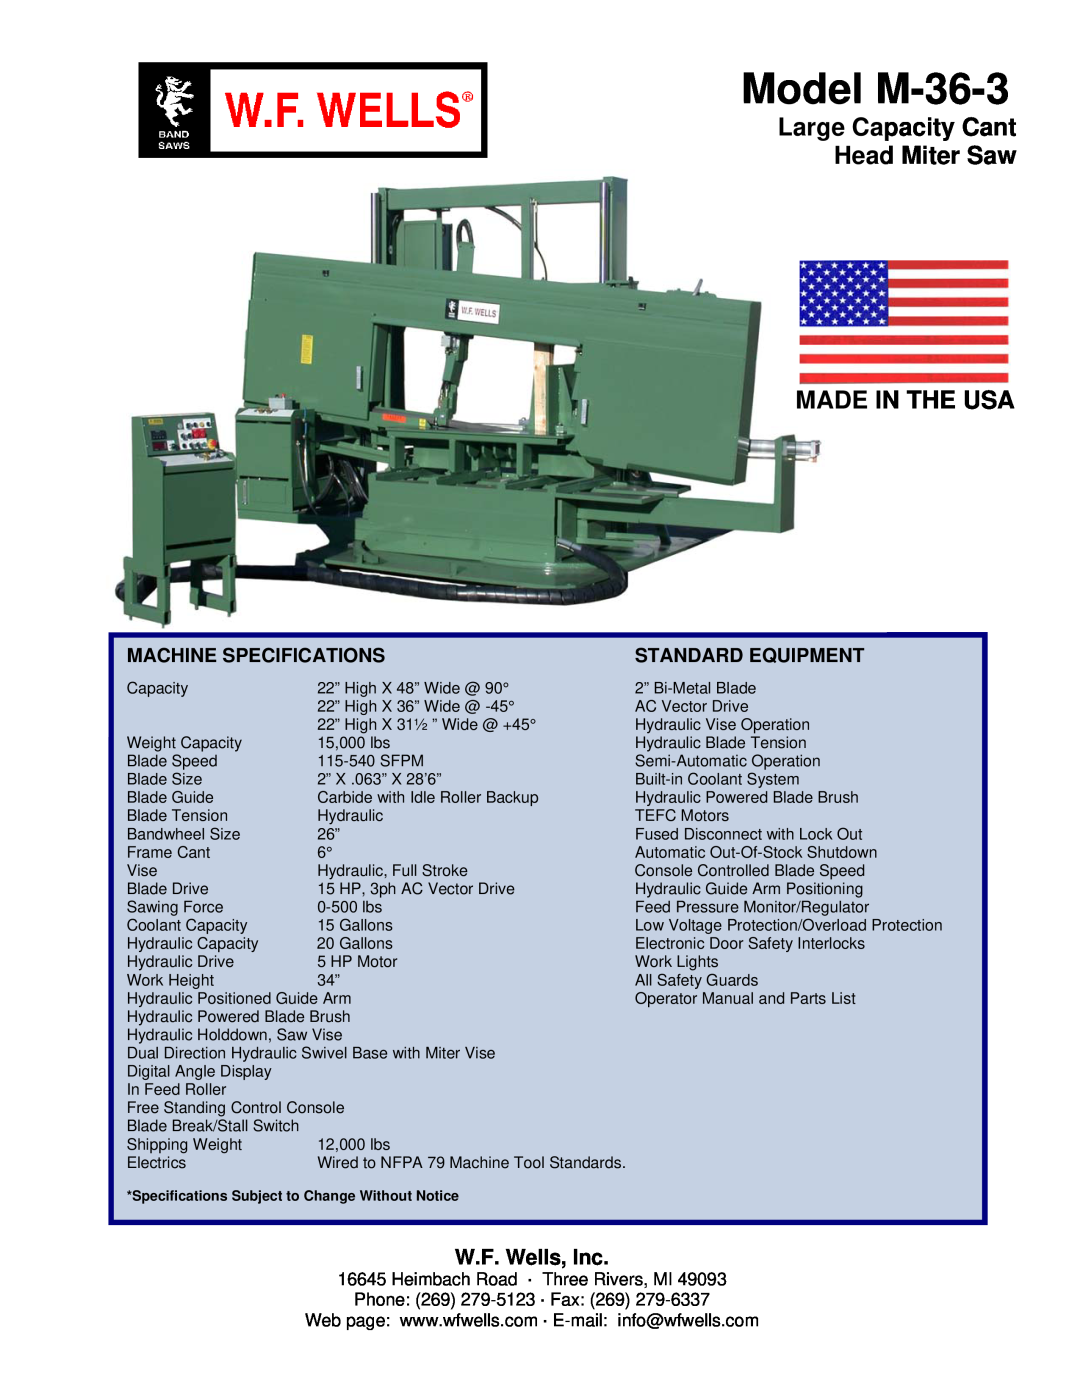 Wells specifications Model M-36-3, Large Capacity Cant Head Miter Saw MADE IN THE USA, W.F. Wells, Inc 